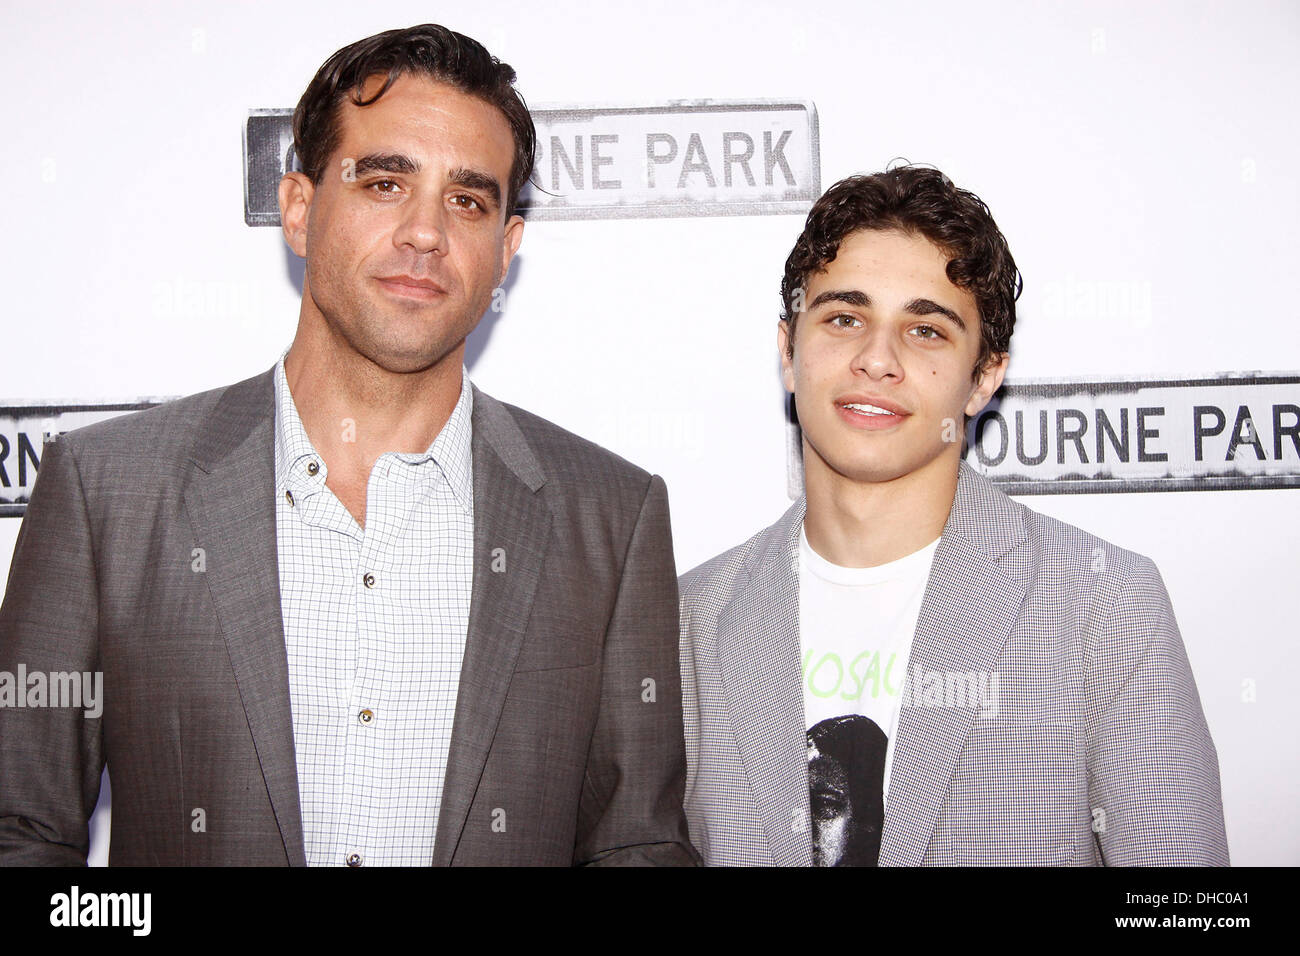 bobby-cannavale-and-his-son-jake-cannavale-broadway-opening-night-DHC0A1.jpg